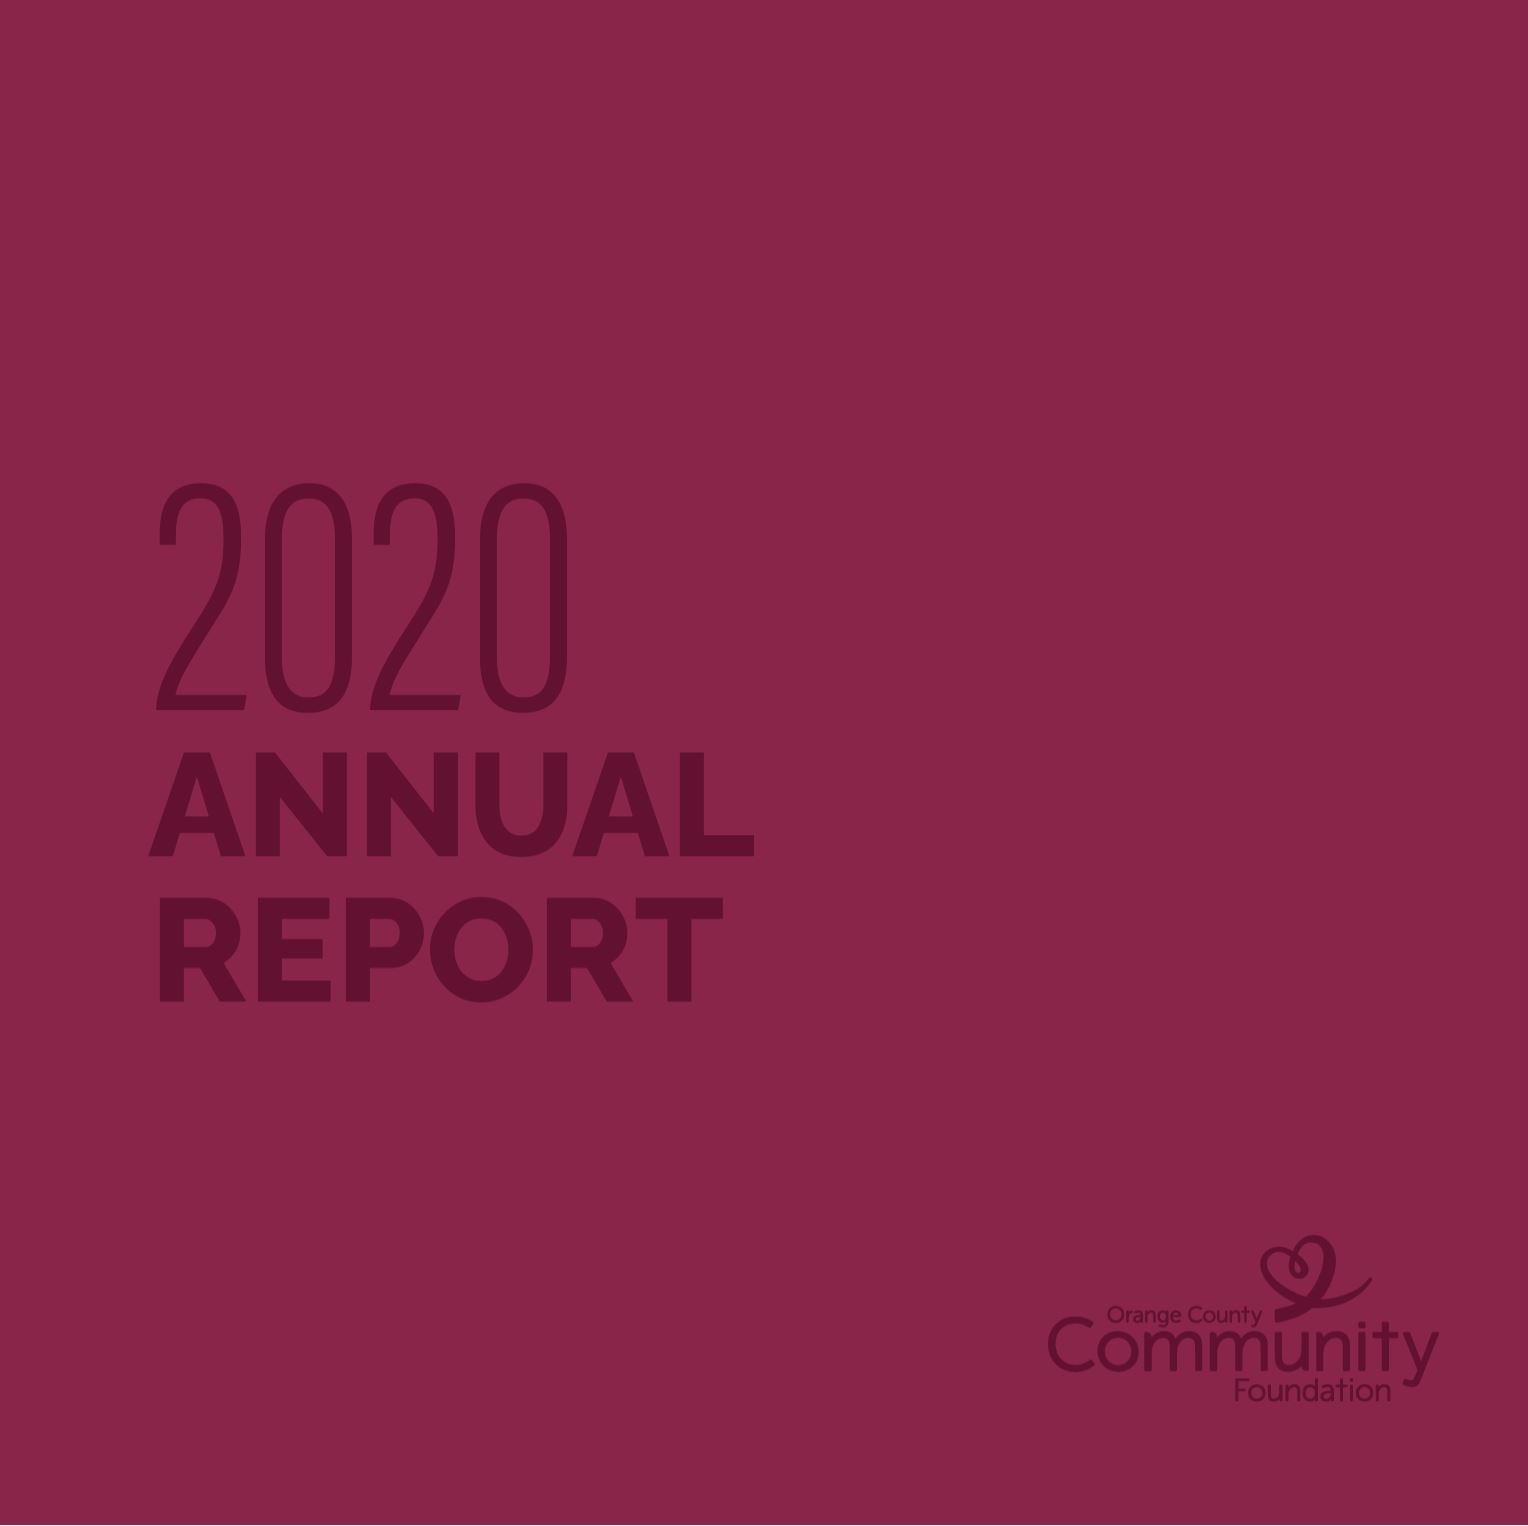 OCCF Annual Report 2020 – Love In Action